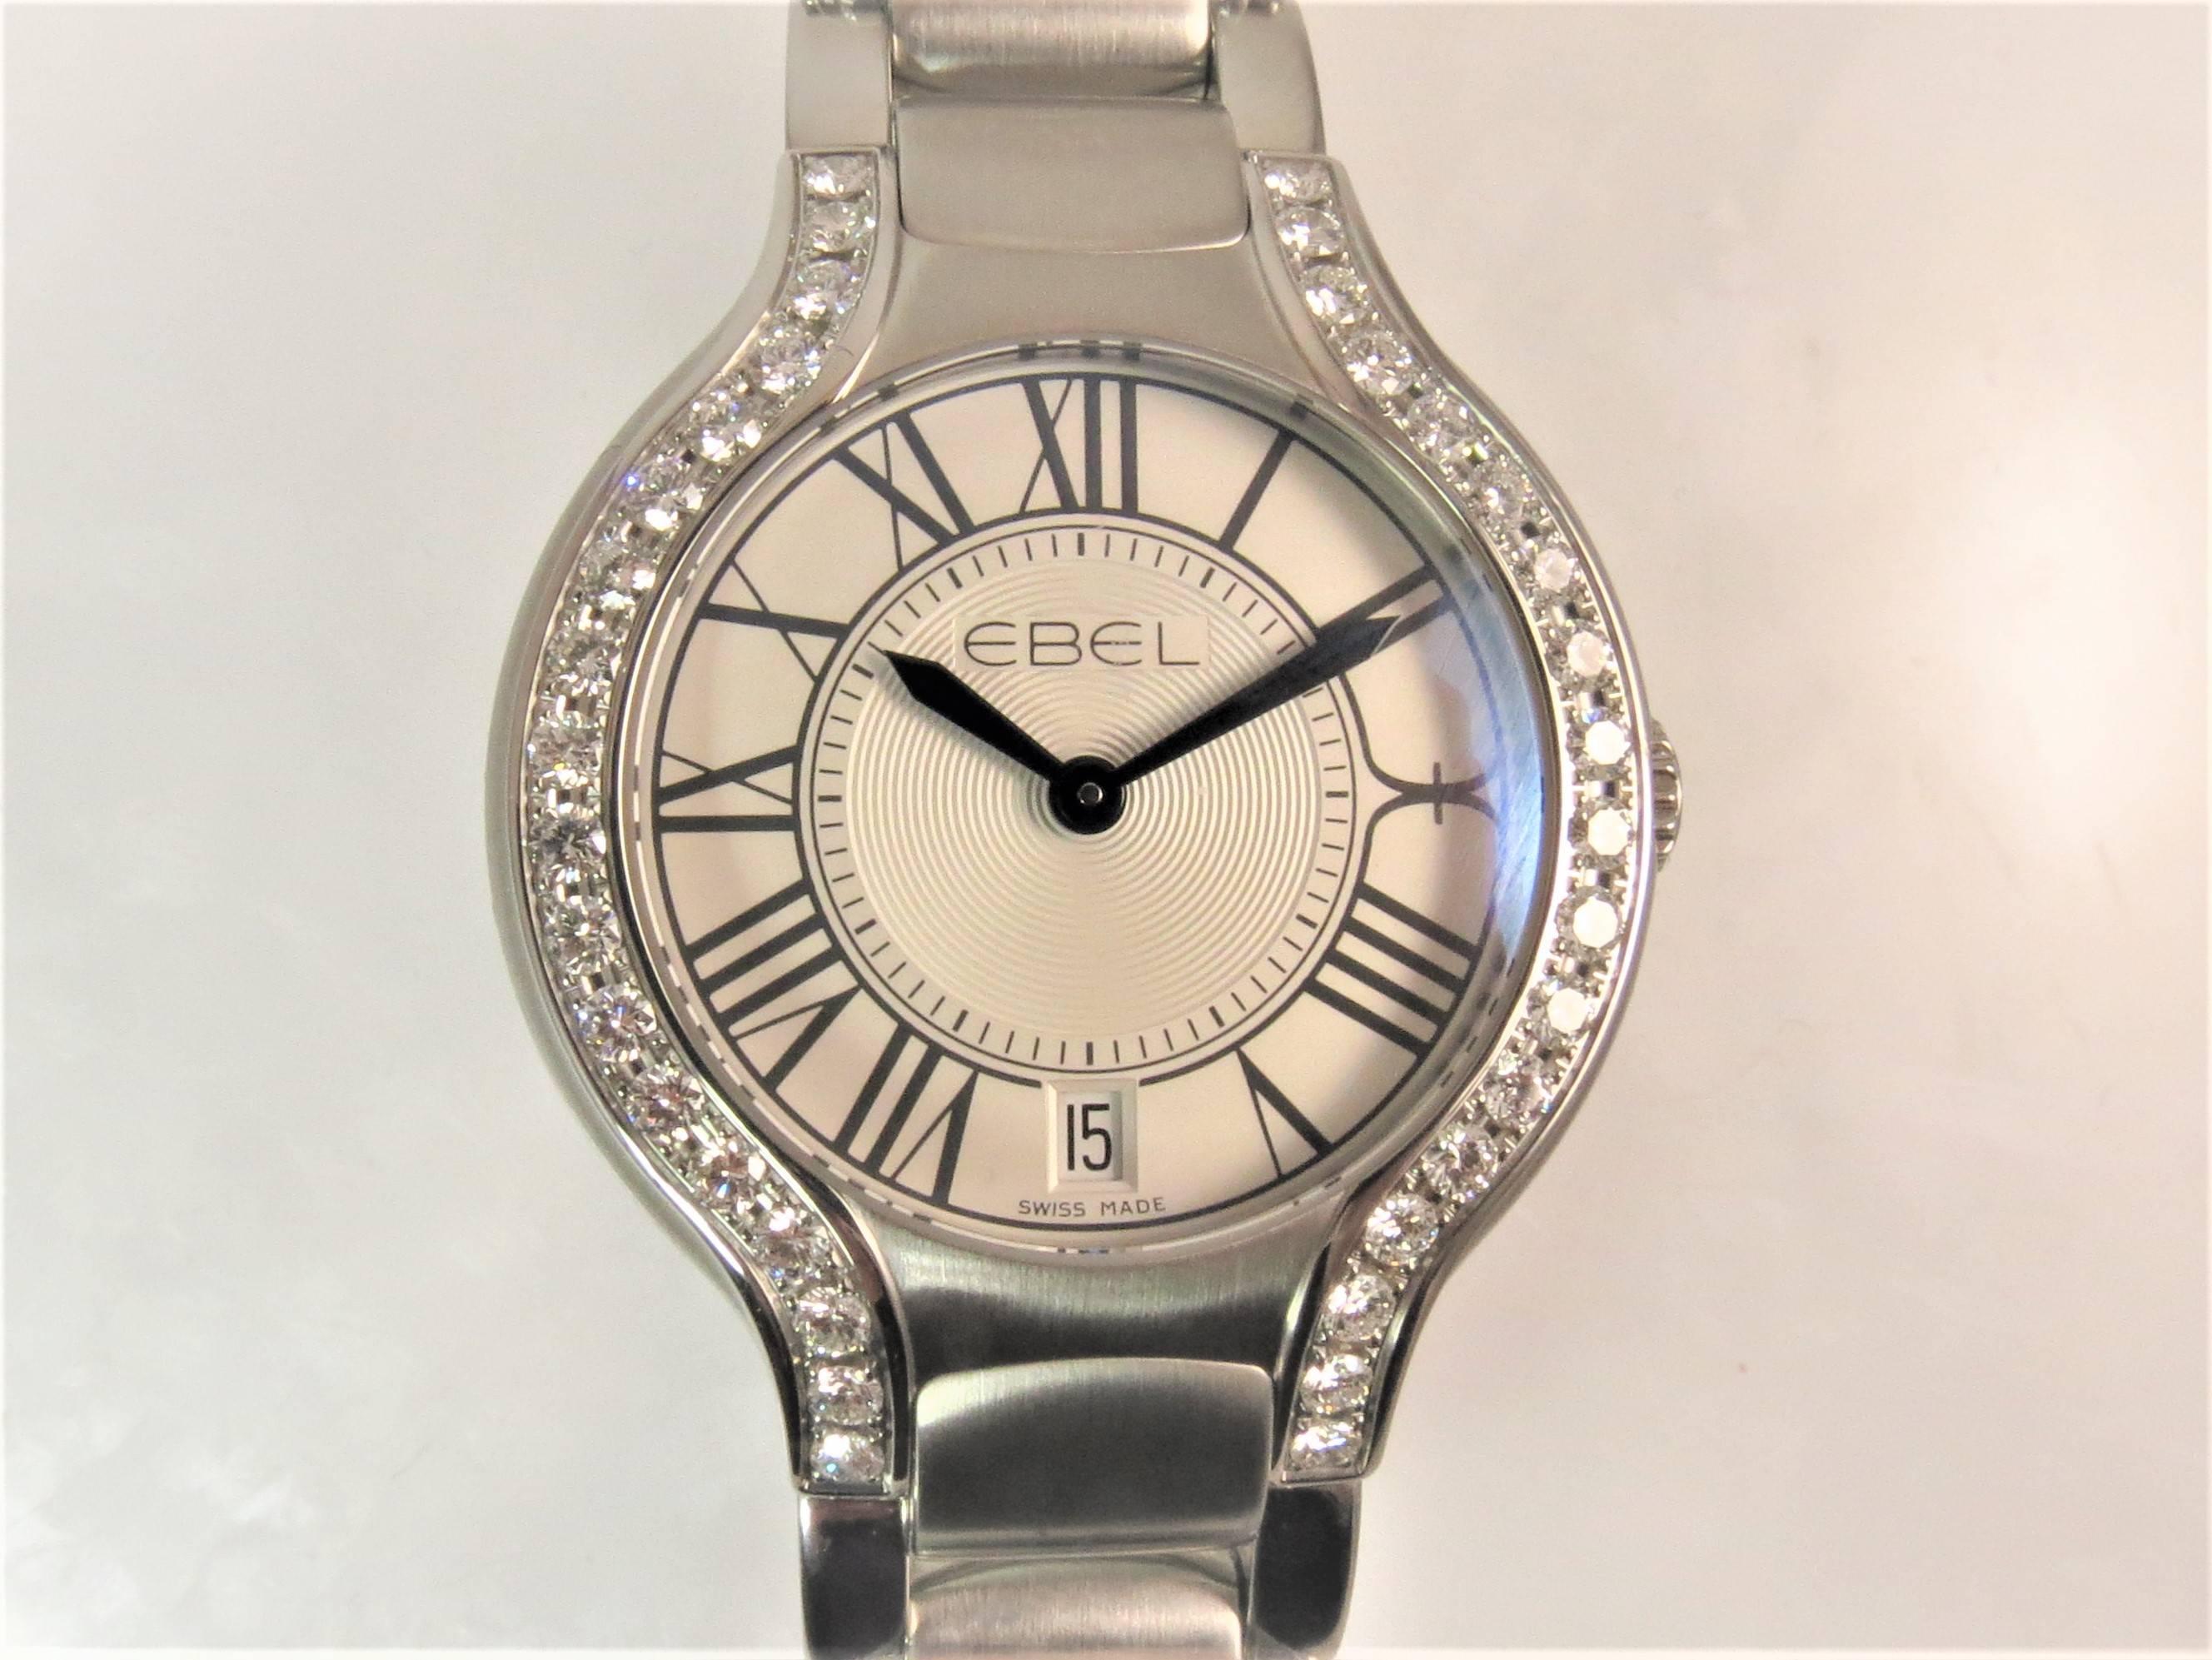 Brand new, never worn, Lady's Ebel Beluga Grande Steel Diamond Bracelet Watch, quartz movement, silver dial, blue hands, date window, deployant clasp, 36 full cut round diamonds on case weighing about 1.69cts.
Model Number 1216071
Serial Number